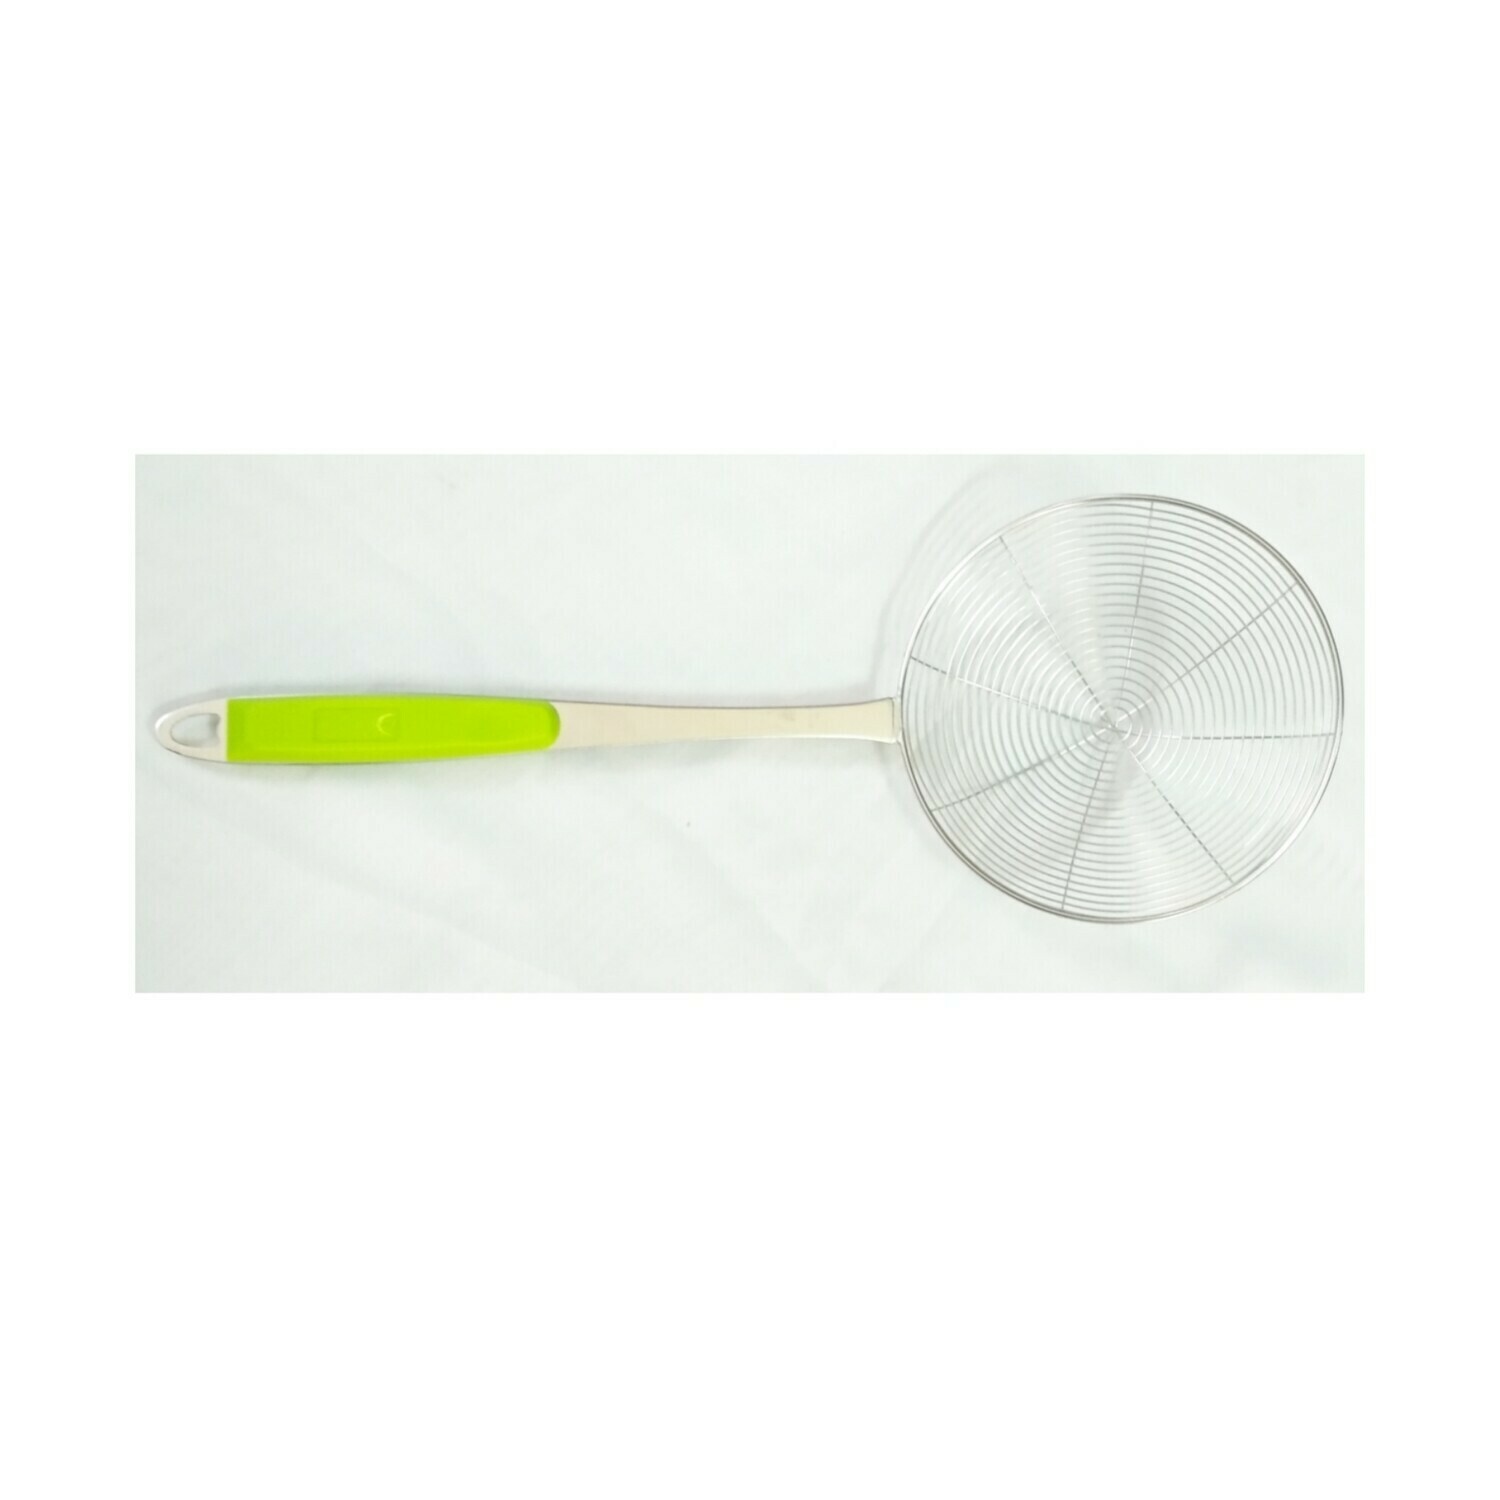 Standard Stainless steel Deep Fry Strainer with Handle for perfect oil Extraction, 14cm - 1 Piece